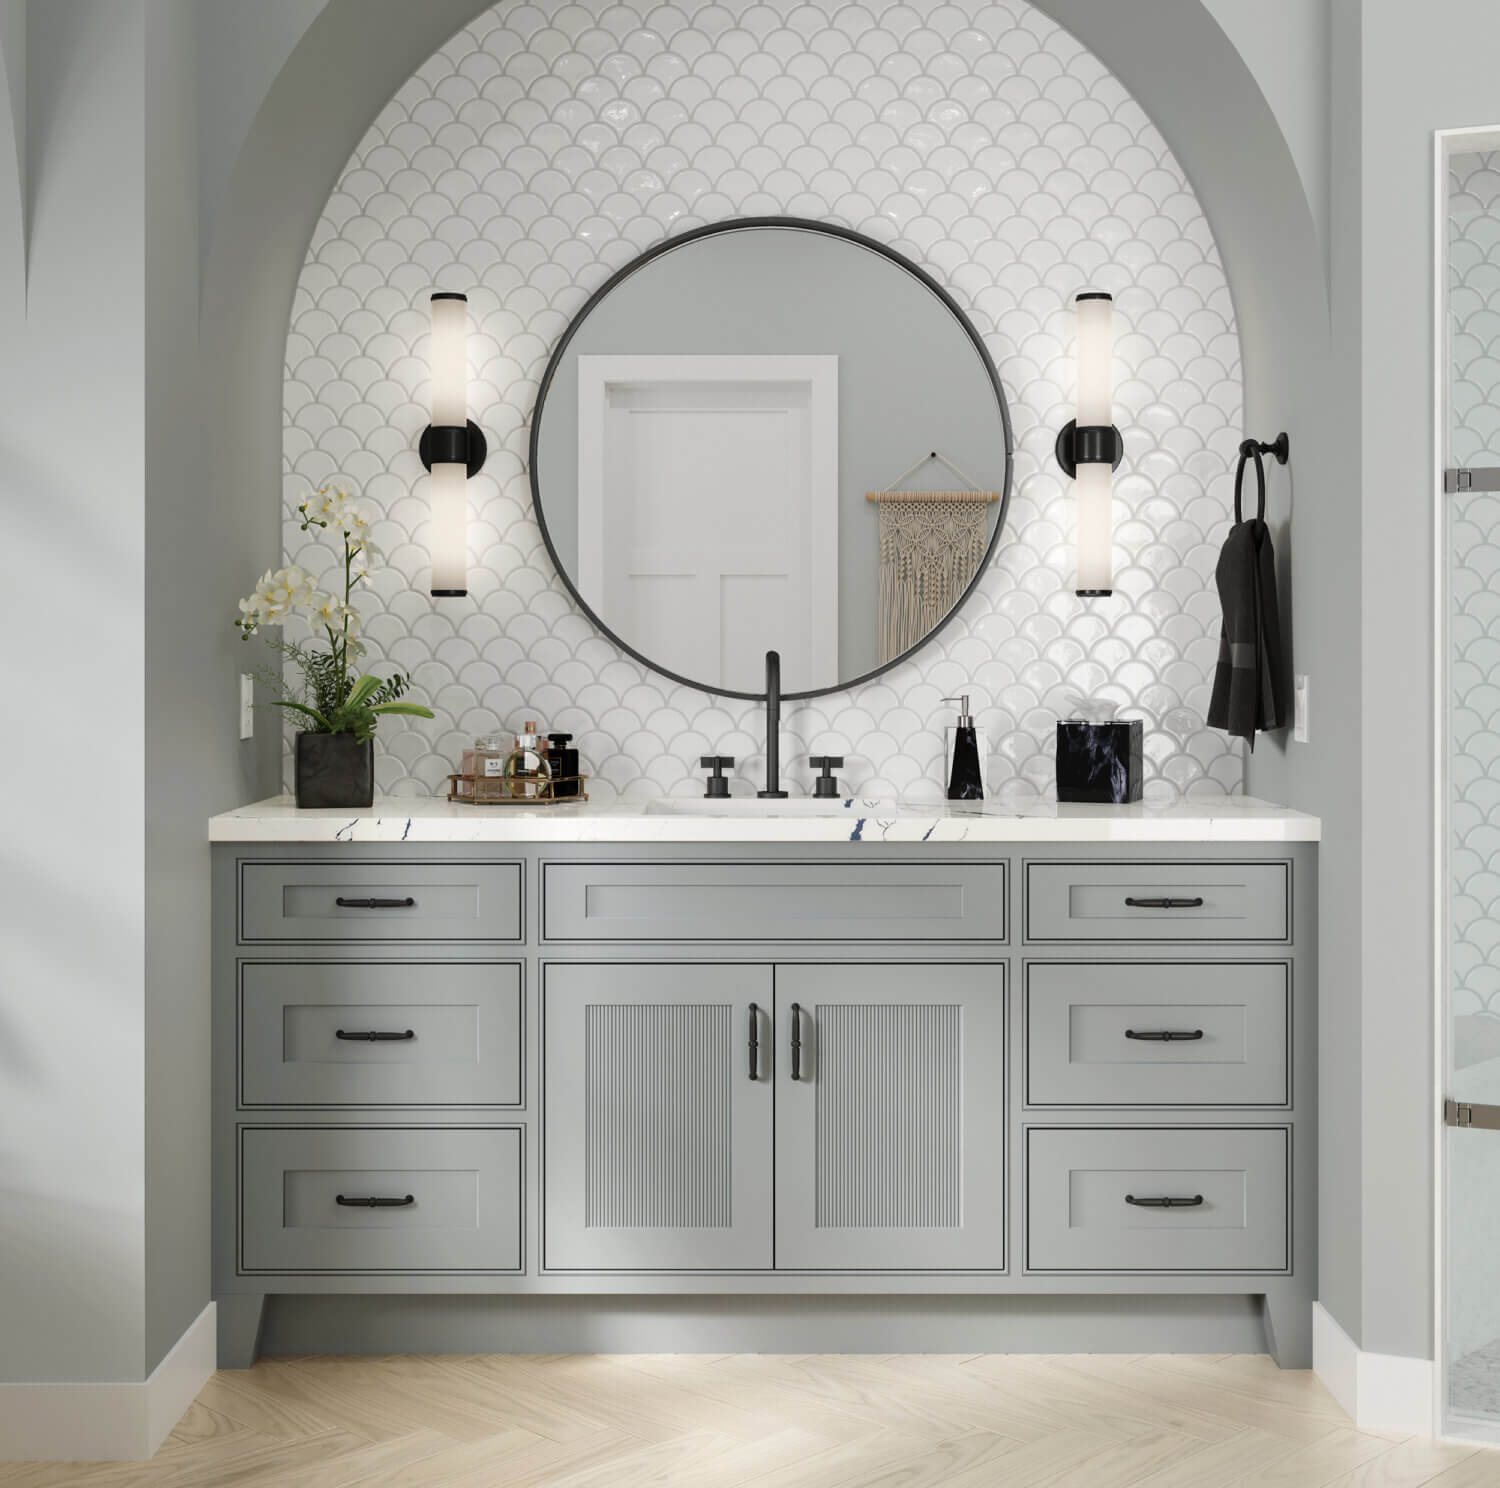 A gray painted bath vanity with reeded cabinet doors and a shallow shaker style tucked into an Arched wall with black faucet and hardware accents.